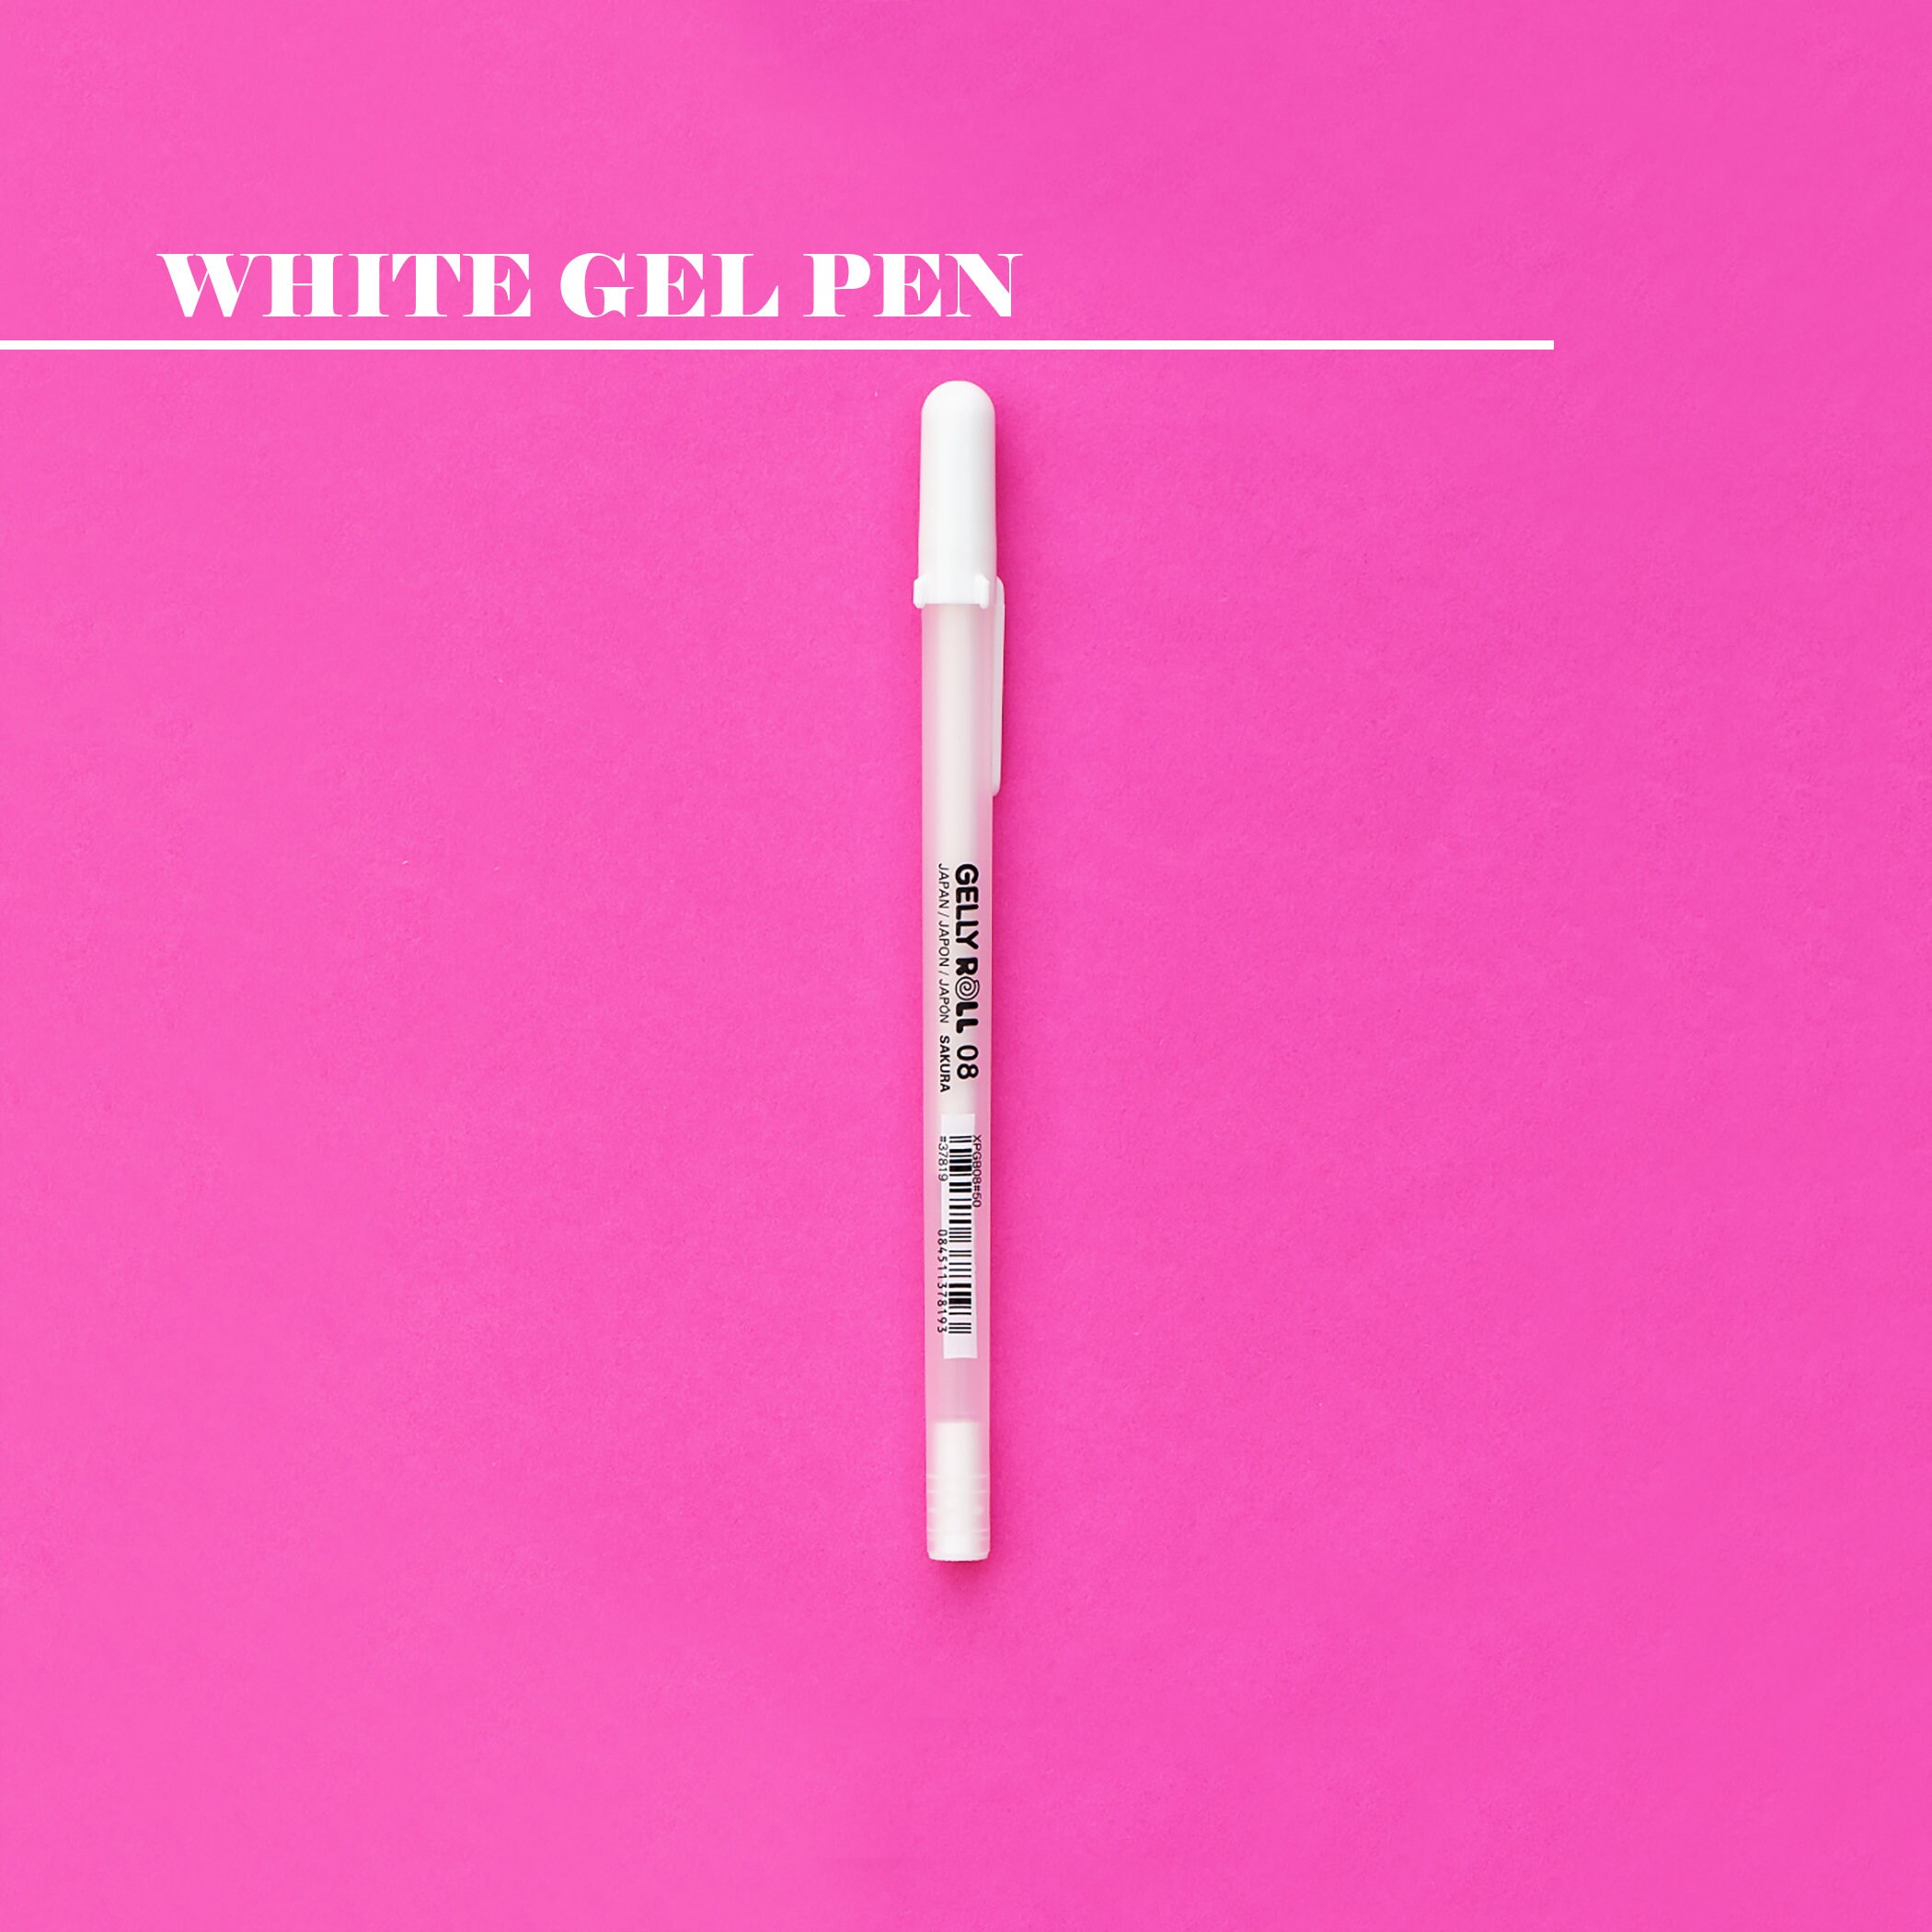 Opaque White Gel Pen - One Pen - For writing on dark surfaces